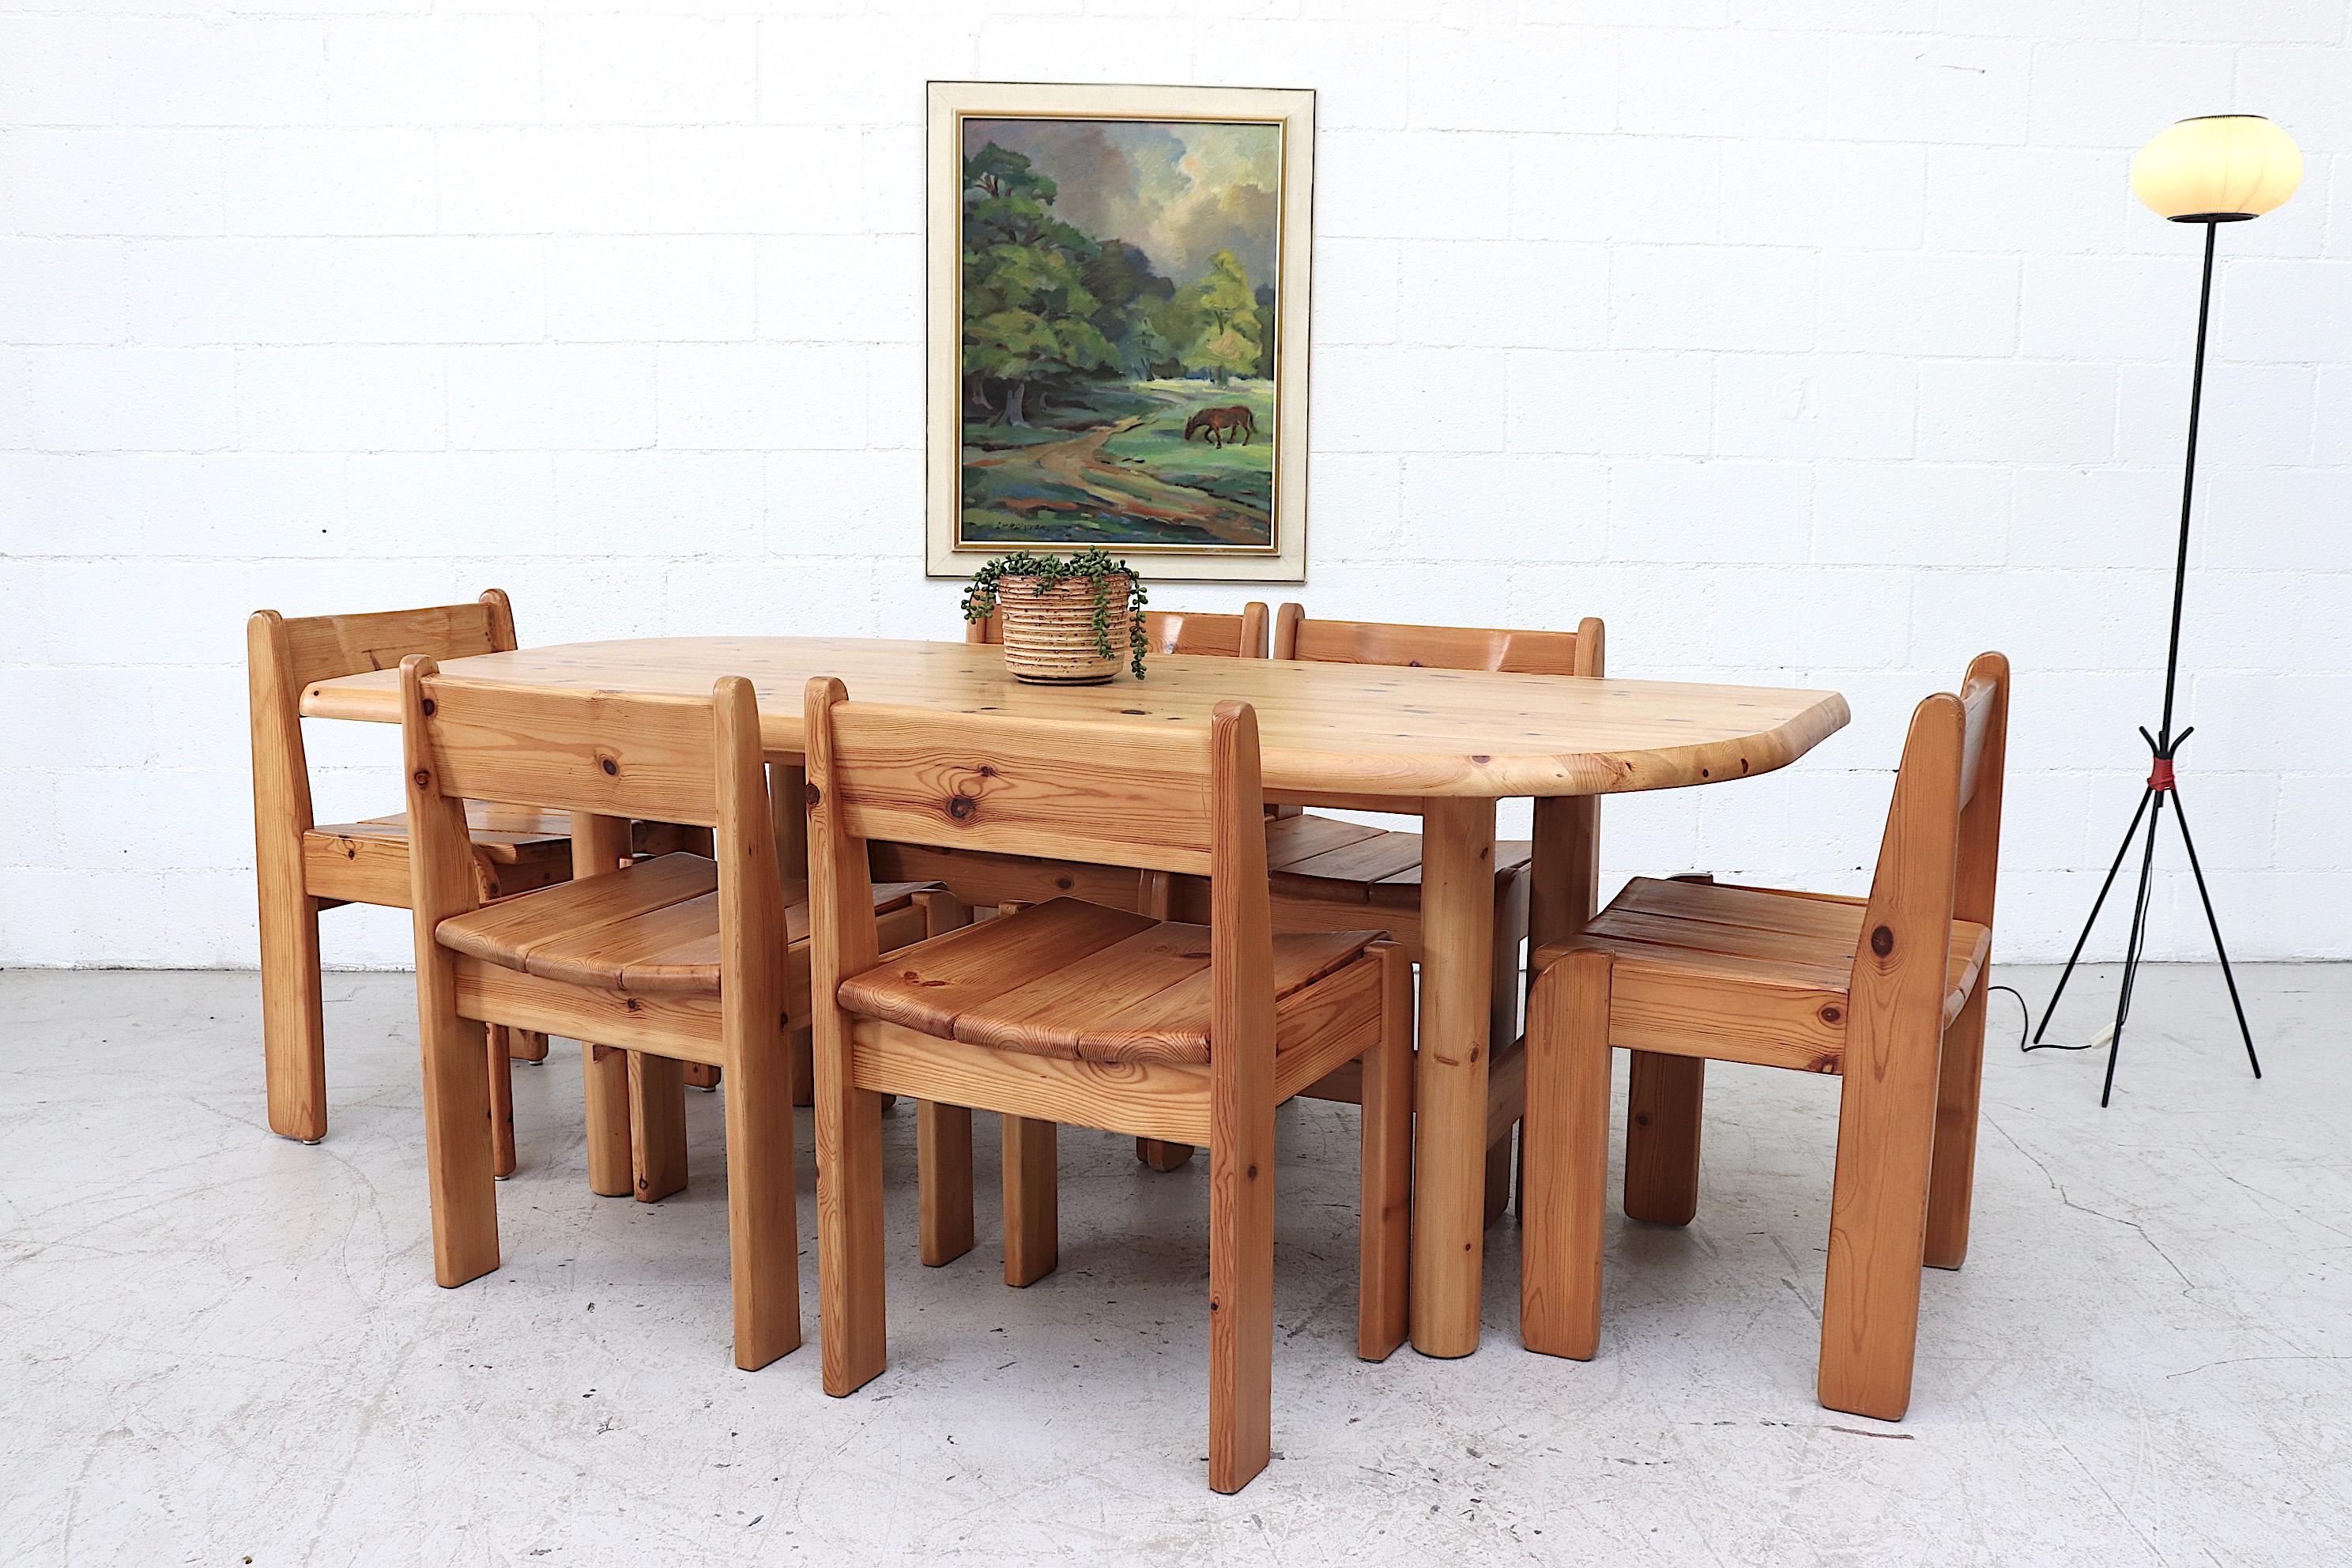 Impressive Ate Van Apeldoorn style pine dining table with alternating curved ends and round pine legs. A stylish dining table with character that comfortably seats 6. Lightly refinished with minor wear consistent with age and use. In original